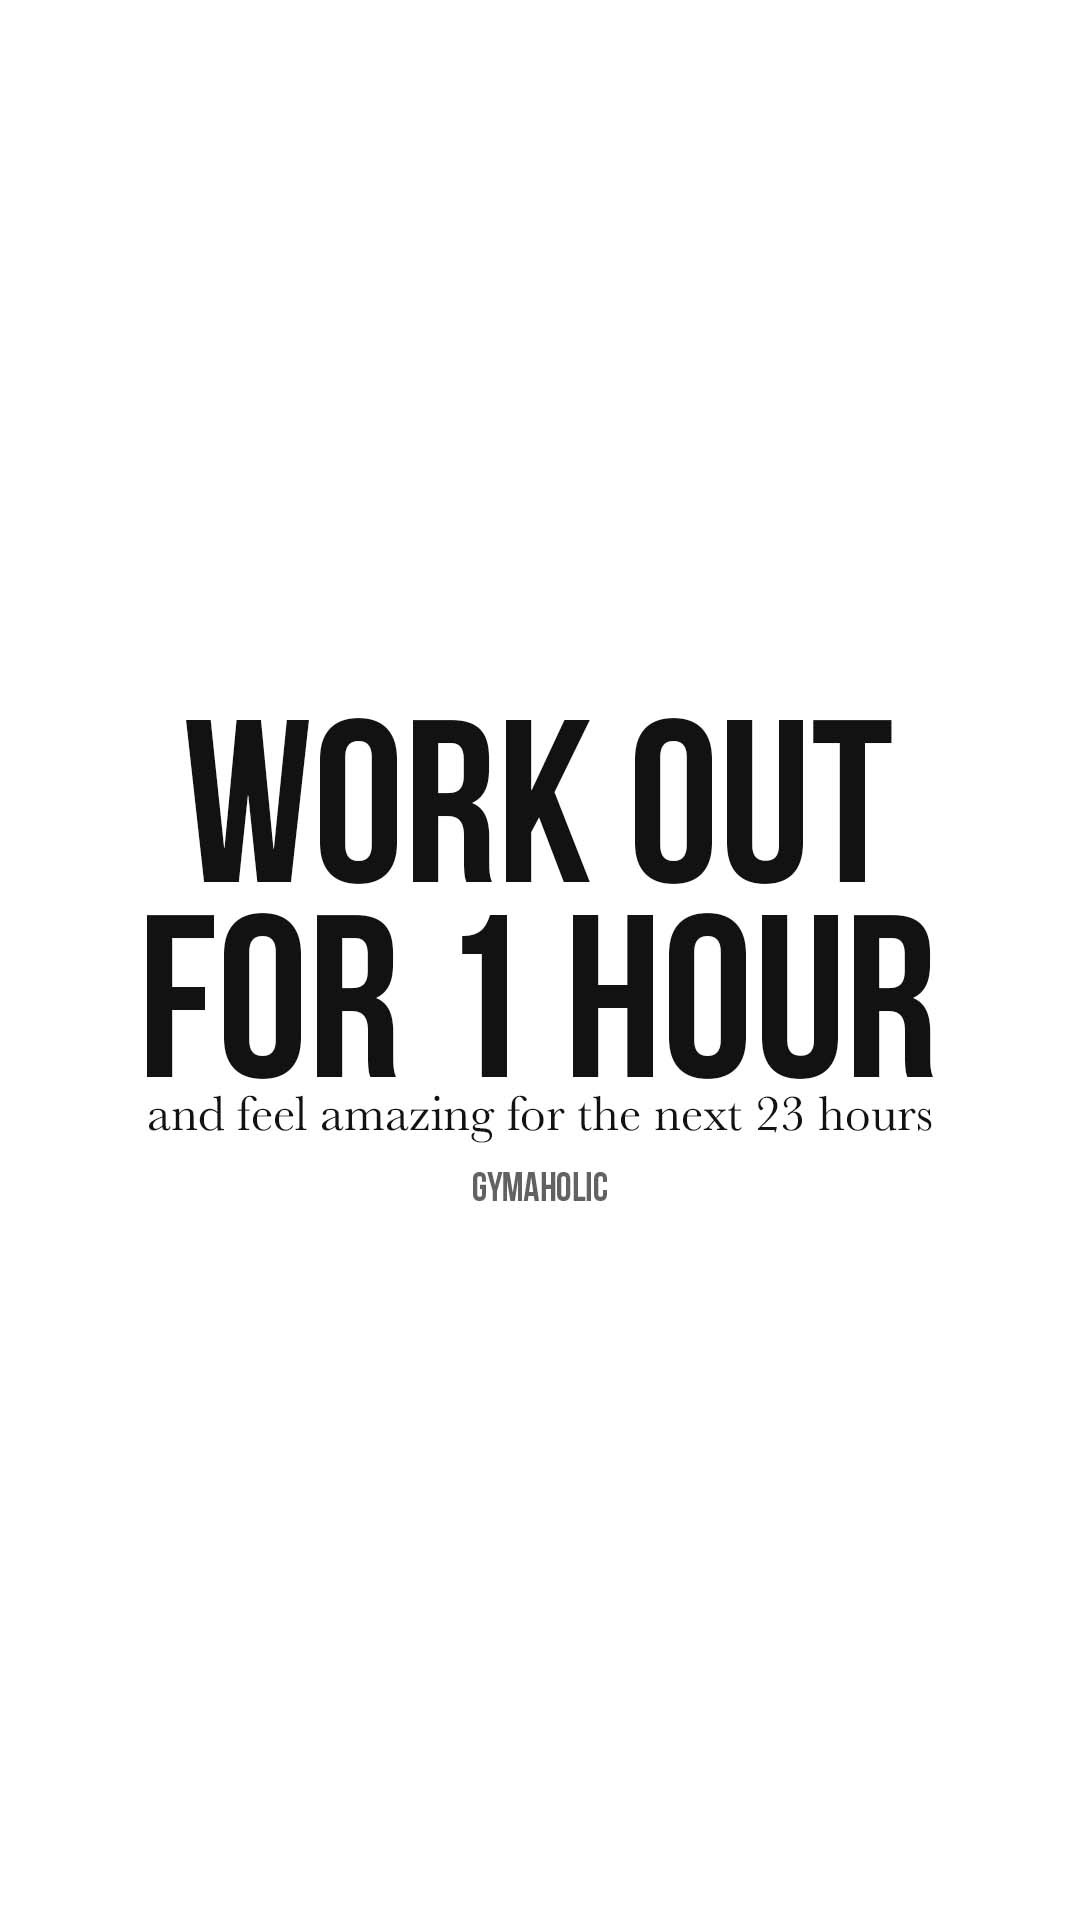 Work out for 1 hour